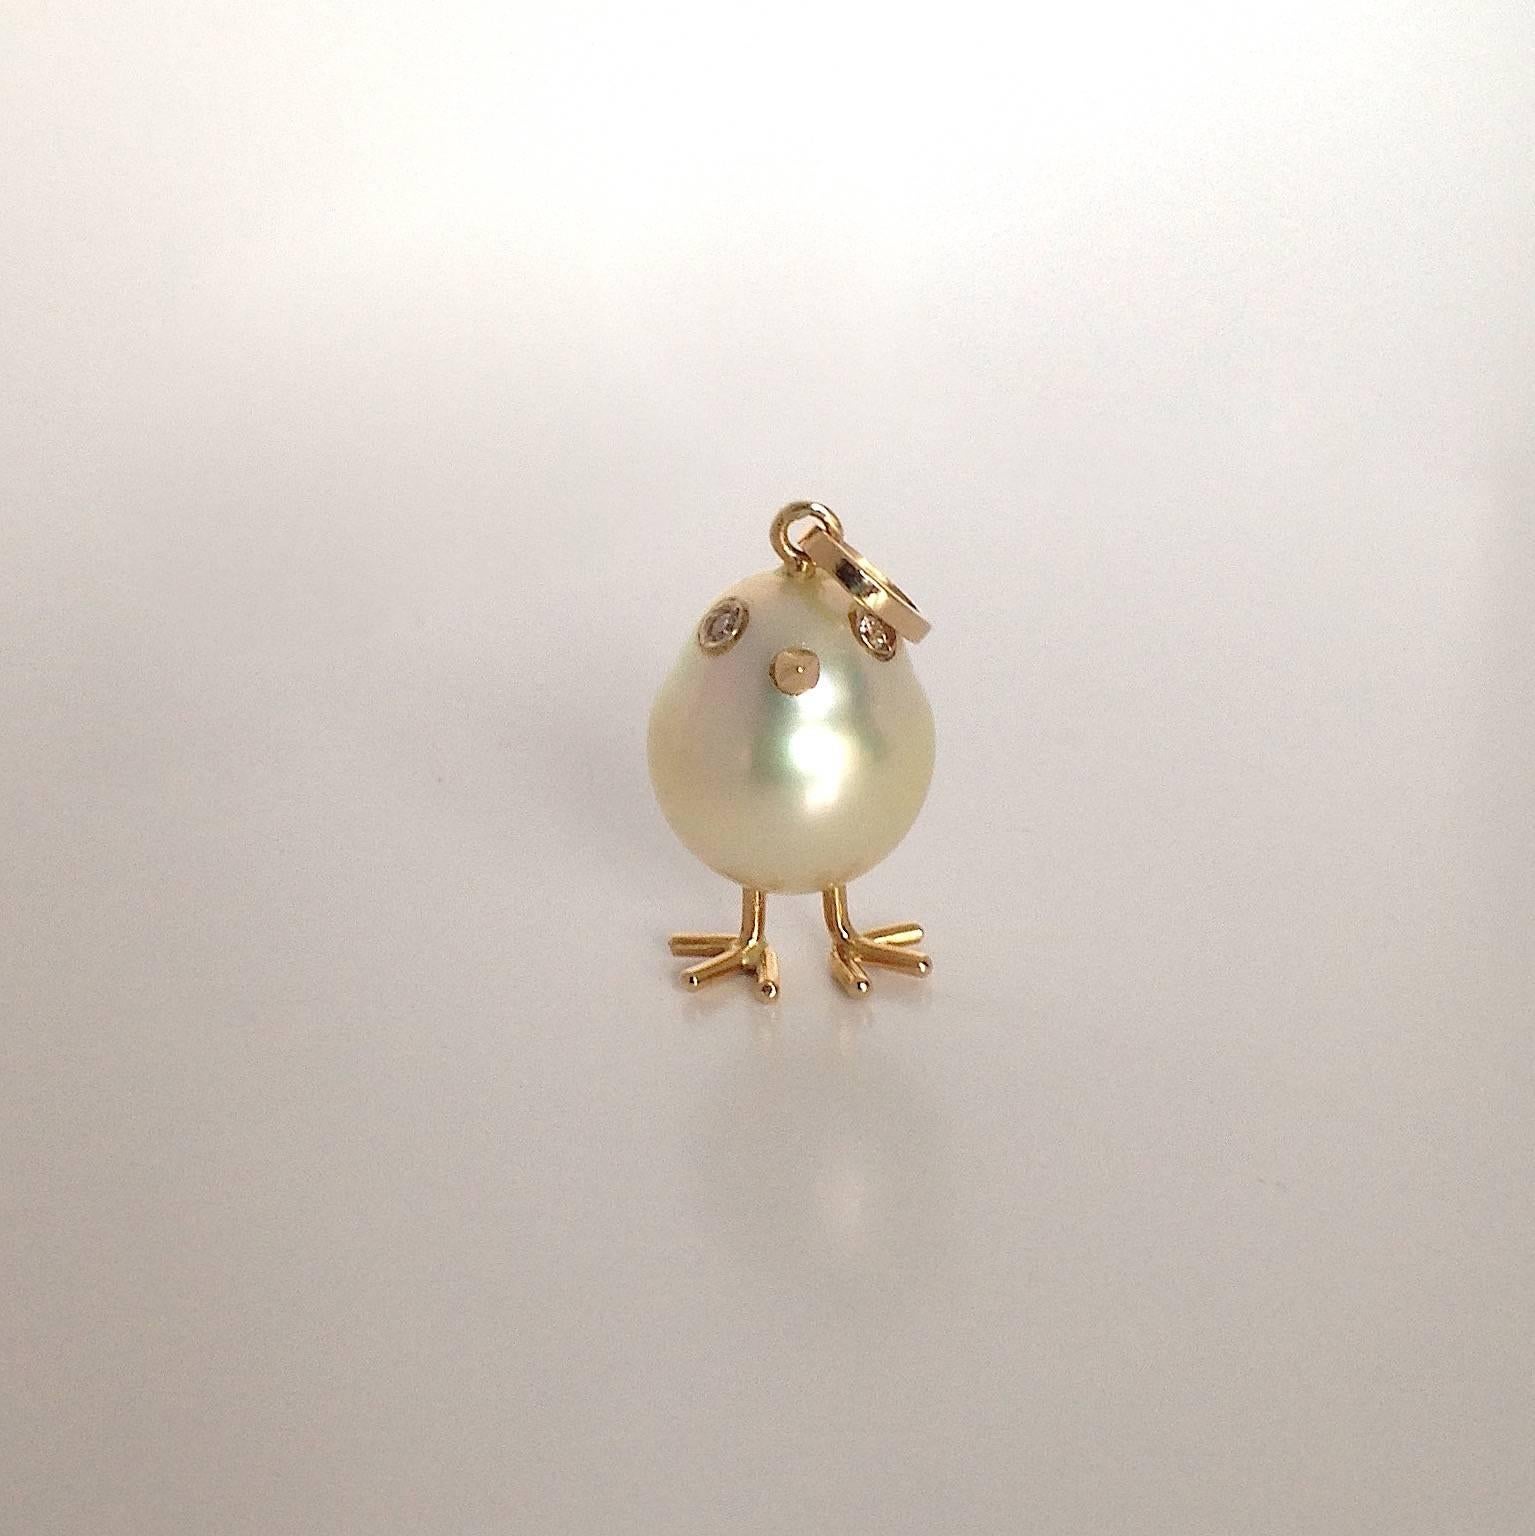 A spherical rare Australian pearl has been carefully crafted to make a chick. He has his two legs, two eyes encrusted with two white diamonds and his beak. The color of the pearl is slightly.
The gold is red for the beak, for the other elements it's